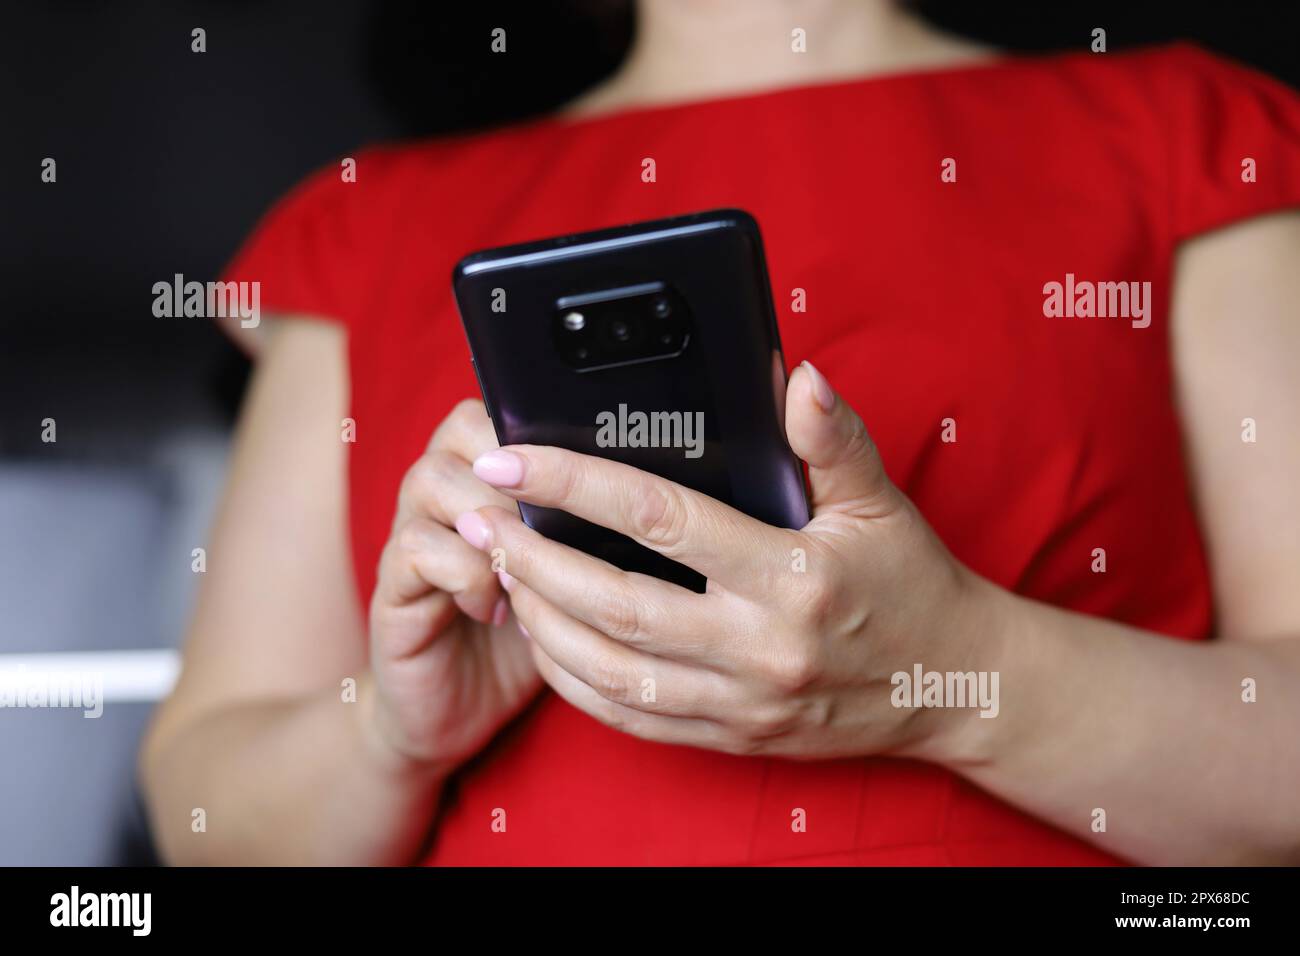 Woman in red dress using smartphone, mobile phone in female hands close up. Concept of online addiction, sms, social media Stock Photo